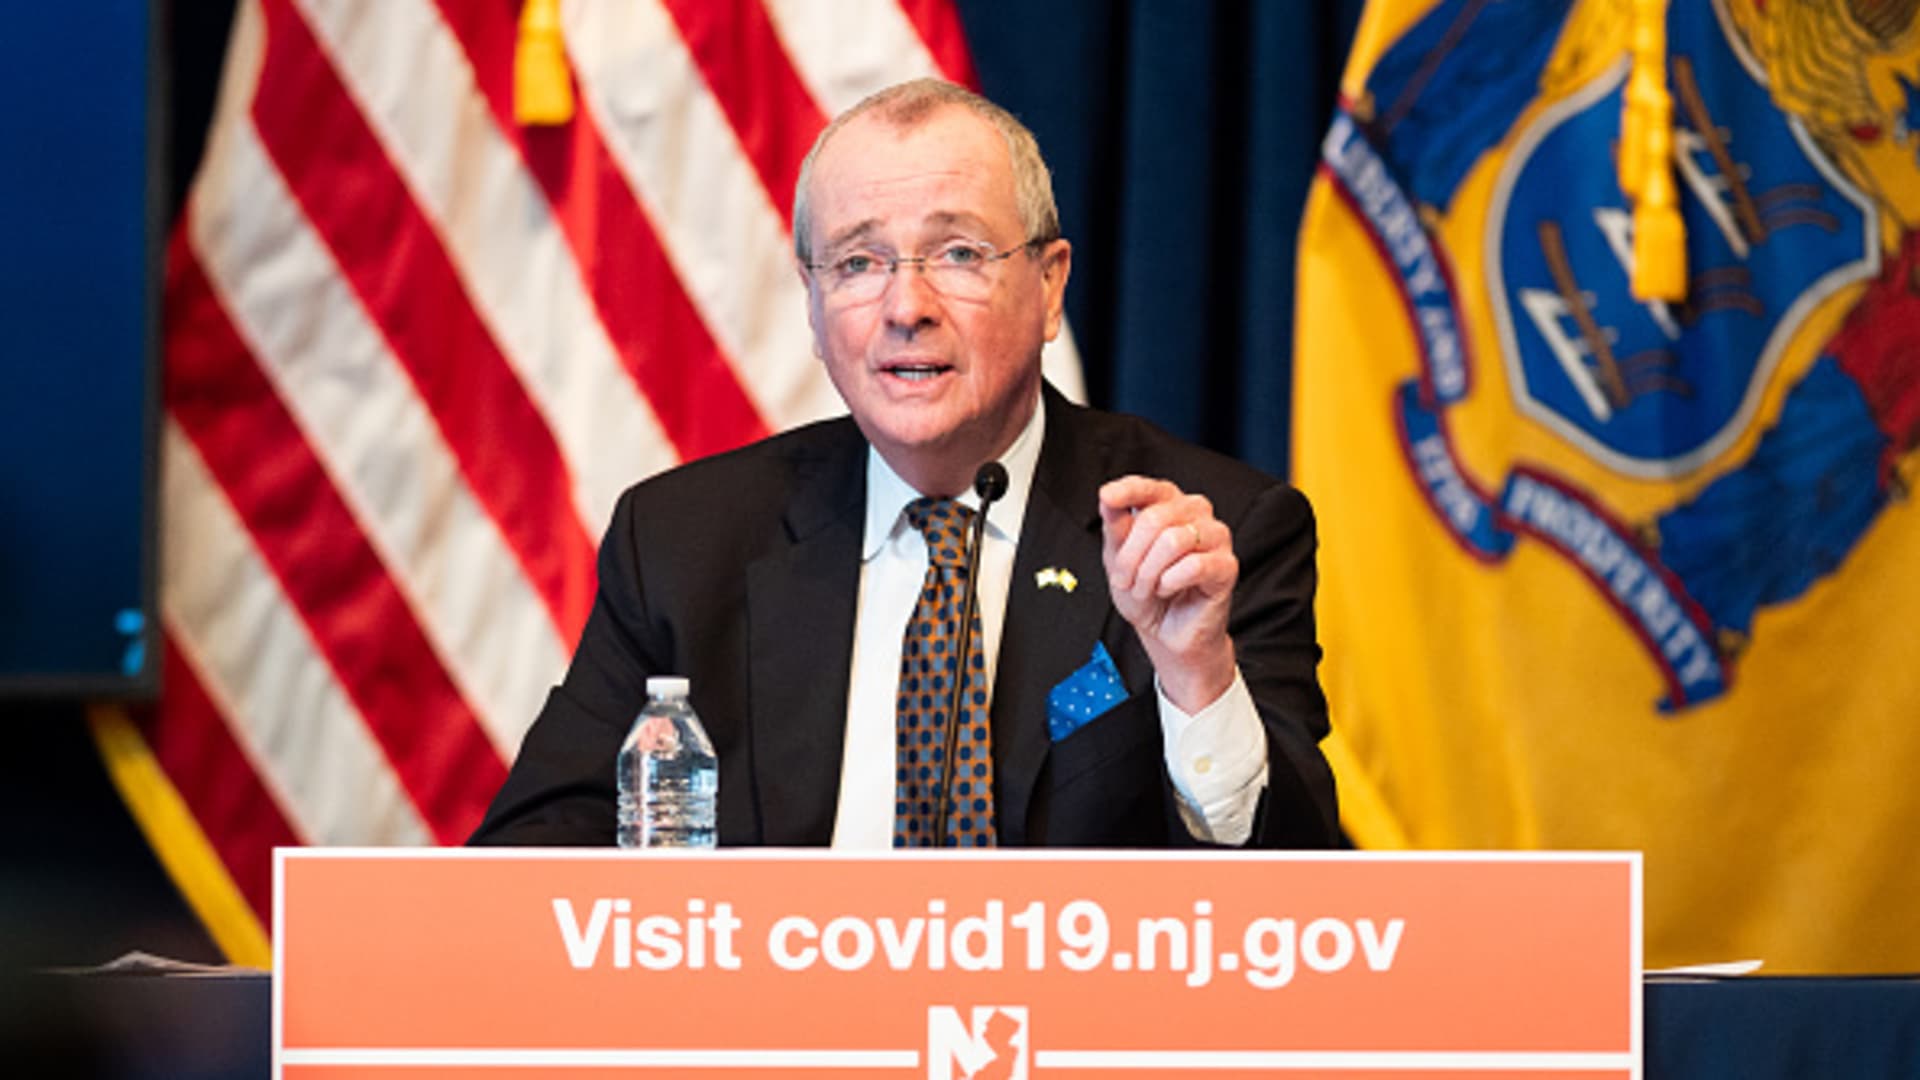 New Jersey Governor Phil Murphy (D) speaks at the Coronavirus press briefing in Trenton, New Jersey.